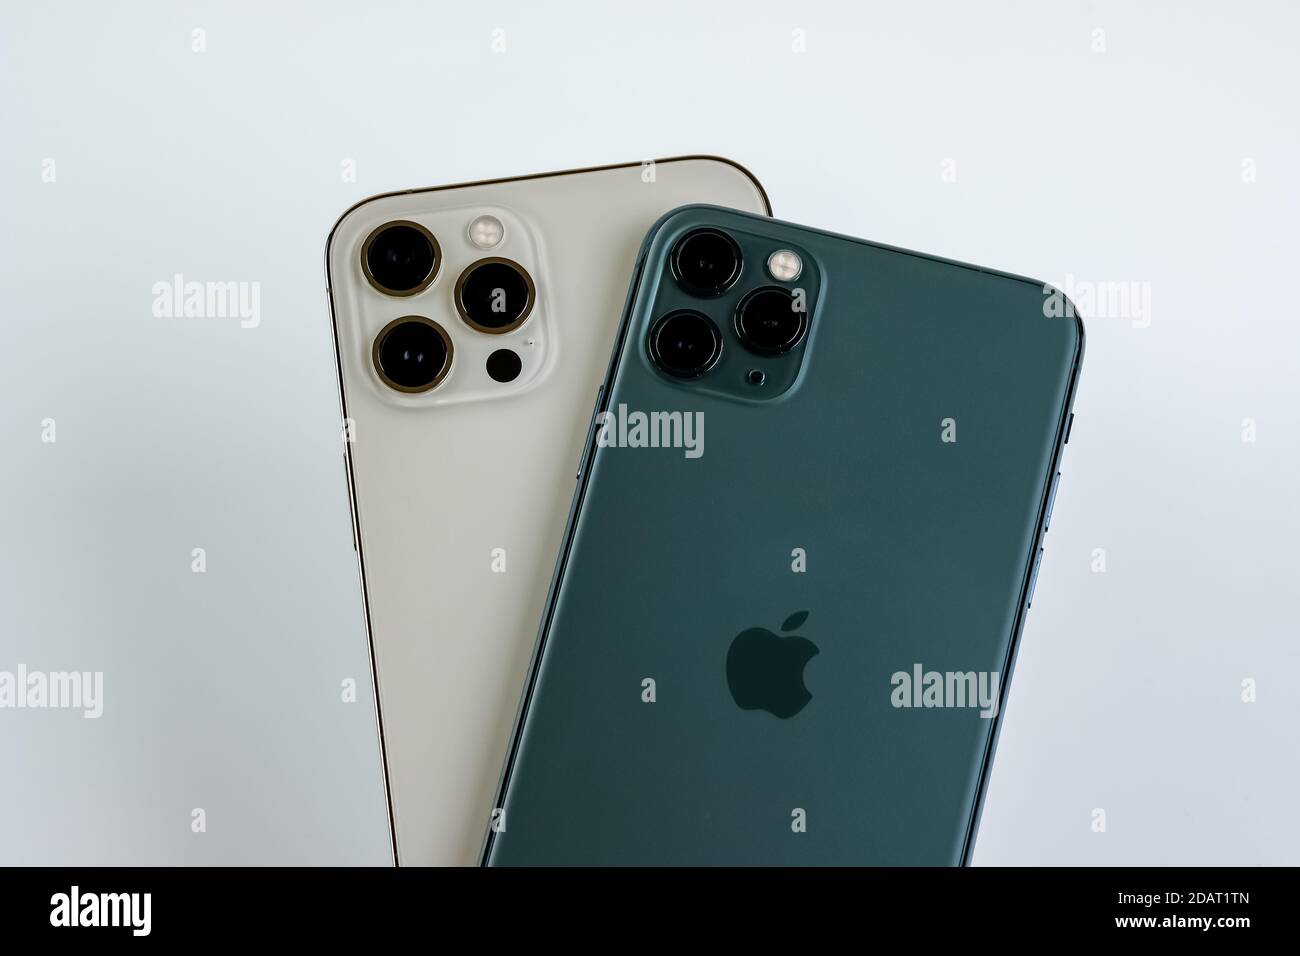 Phone 12 Pro Max In Gold Next To Iphone 11 Pro Max In Midnight Green Color Stock Photo Alamy